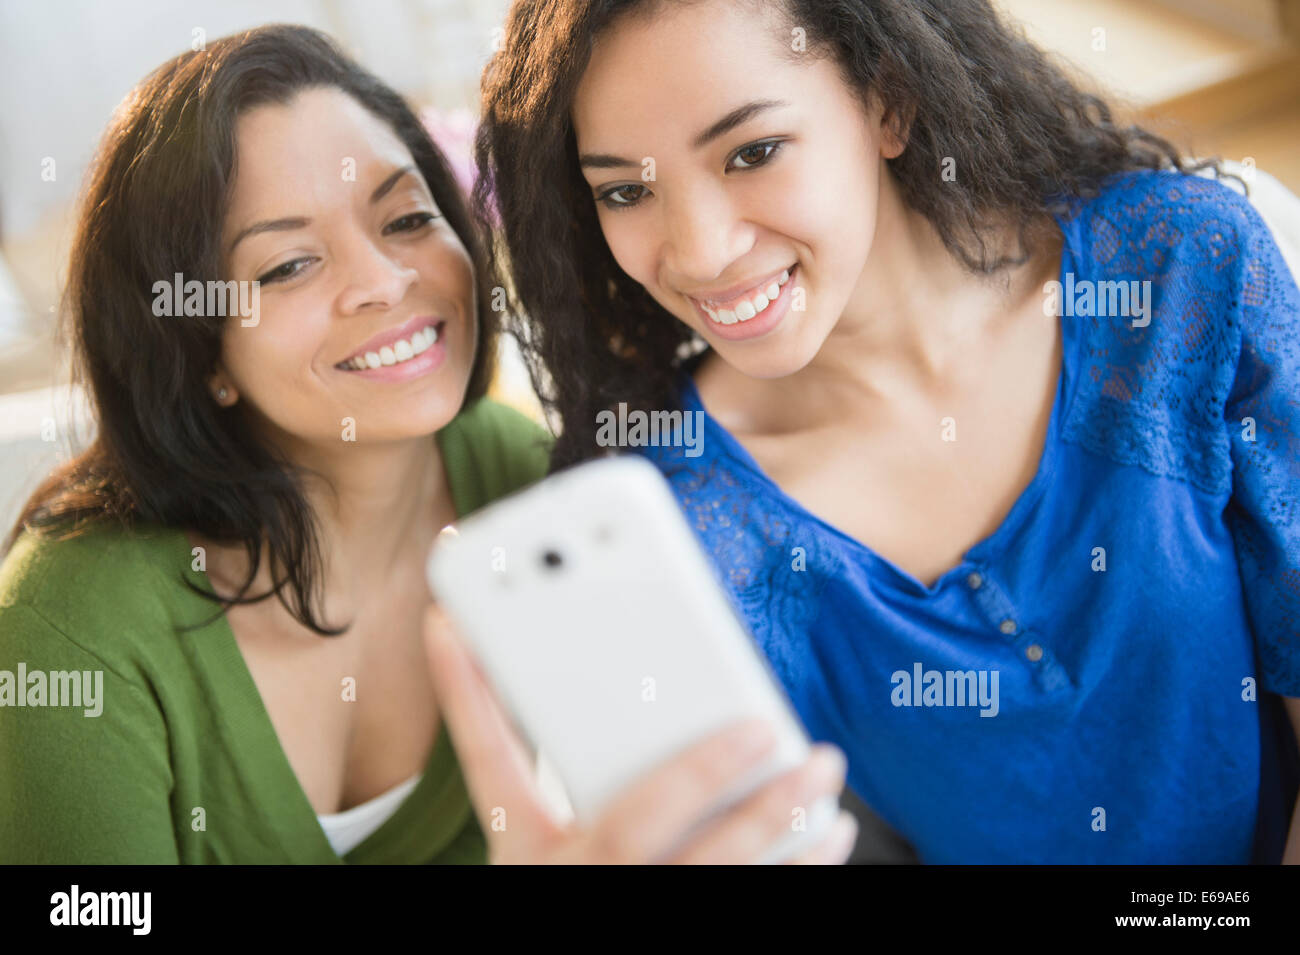 Mother and daughter taking picture with cell phone Stock Photo